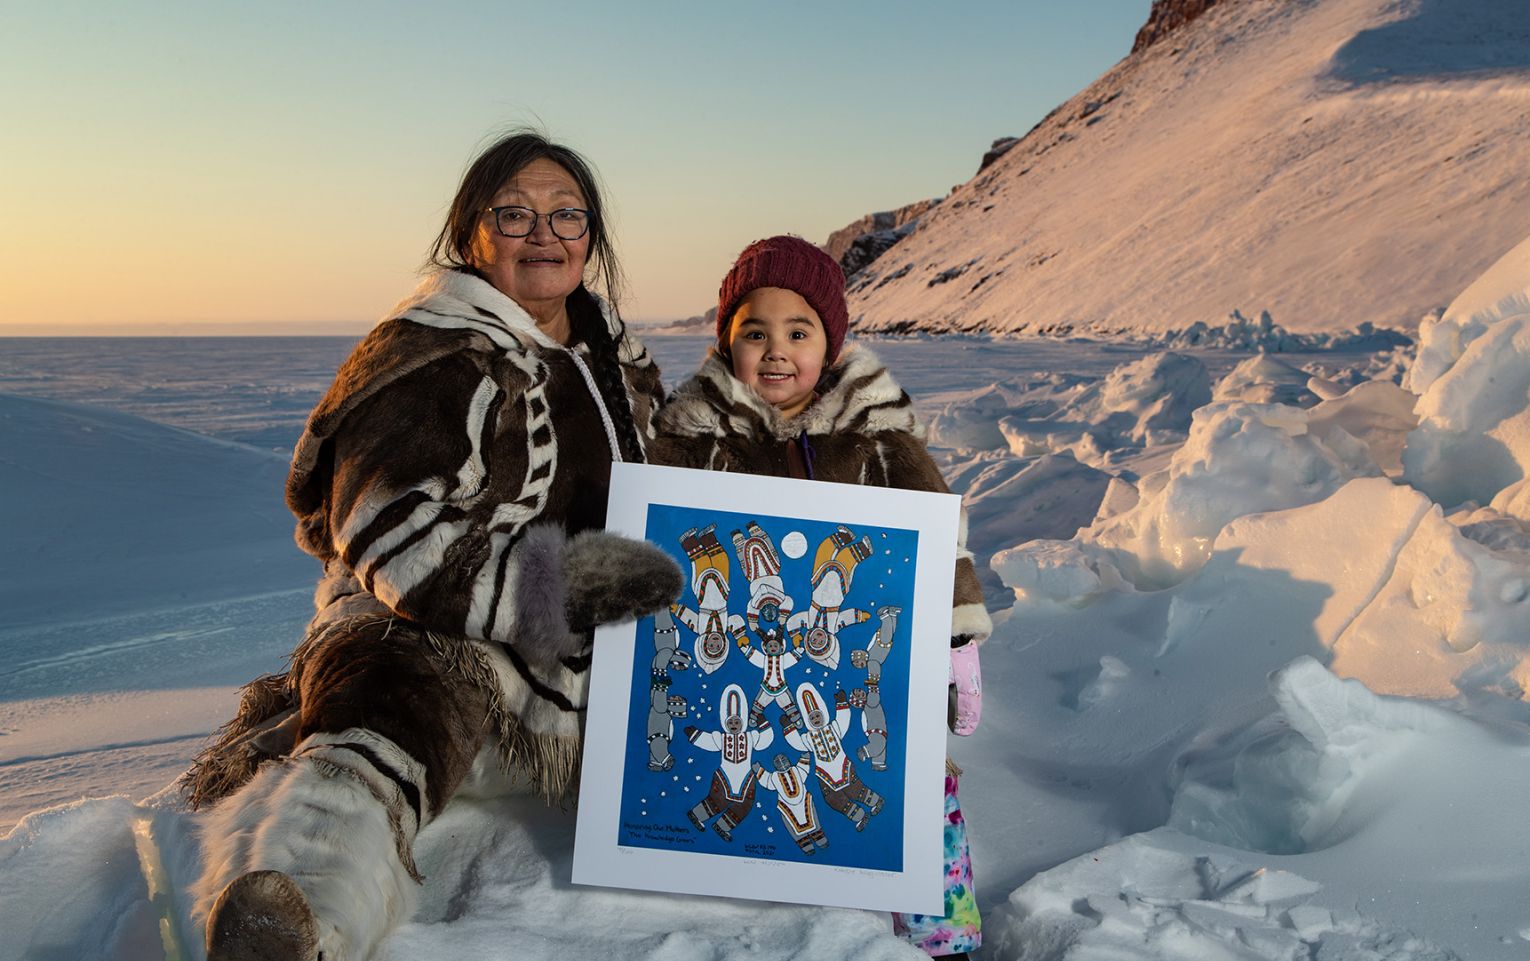 The winner of Nunavut's directory art contest,  Kataisee Attagutsiak with her young great granddaughter Nala holding a lithograph of the winning art. They are sending on the edge of a snowy, vast landscape. To the right, a snowy cliff shoots out of the earth at about at 45 degree angle. Both are wearing entirely traditional Inuit clothing which looks to be made of sealskin, and possibly caribou. Both are smiling widely.